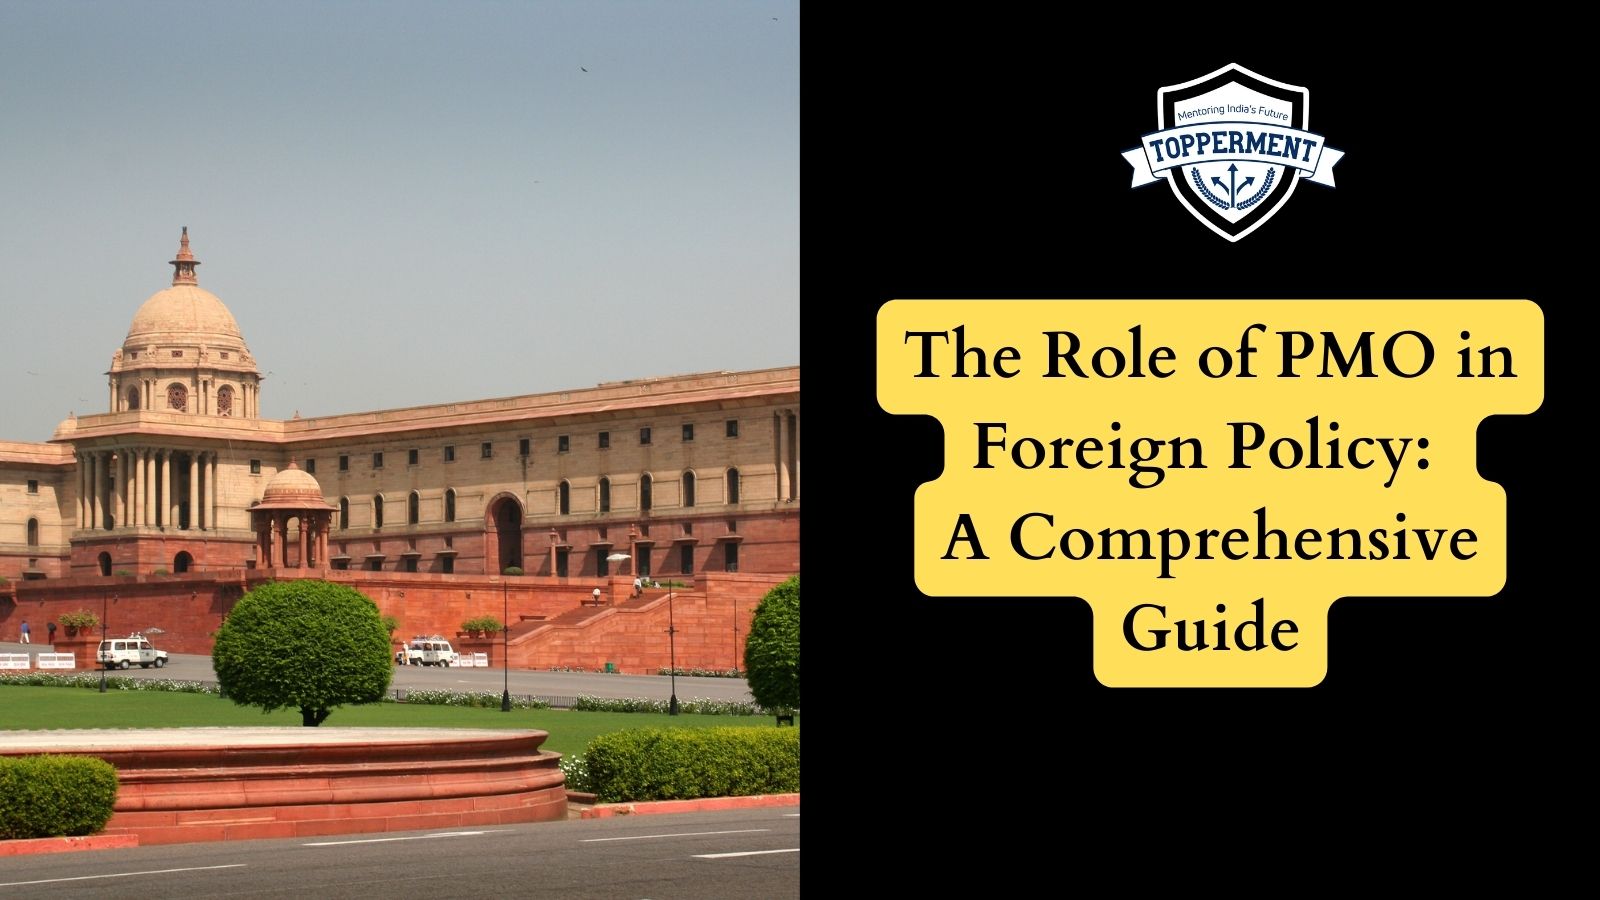 What is the role of PMO in making foreign policy? | Best UPSC IAS Coaching For Mentorship And Guidance